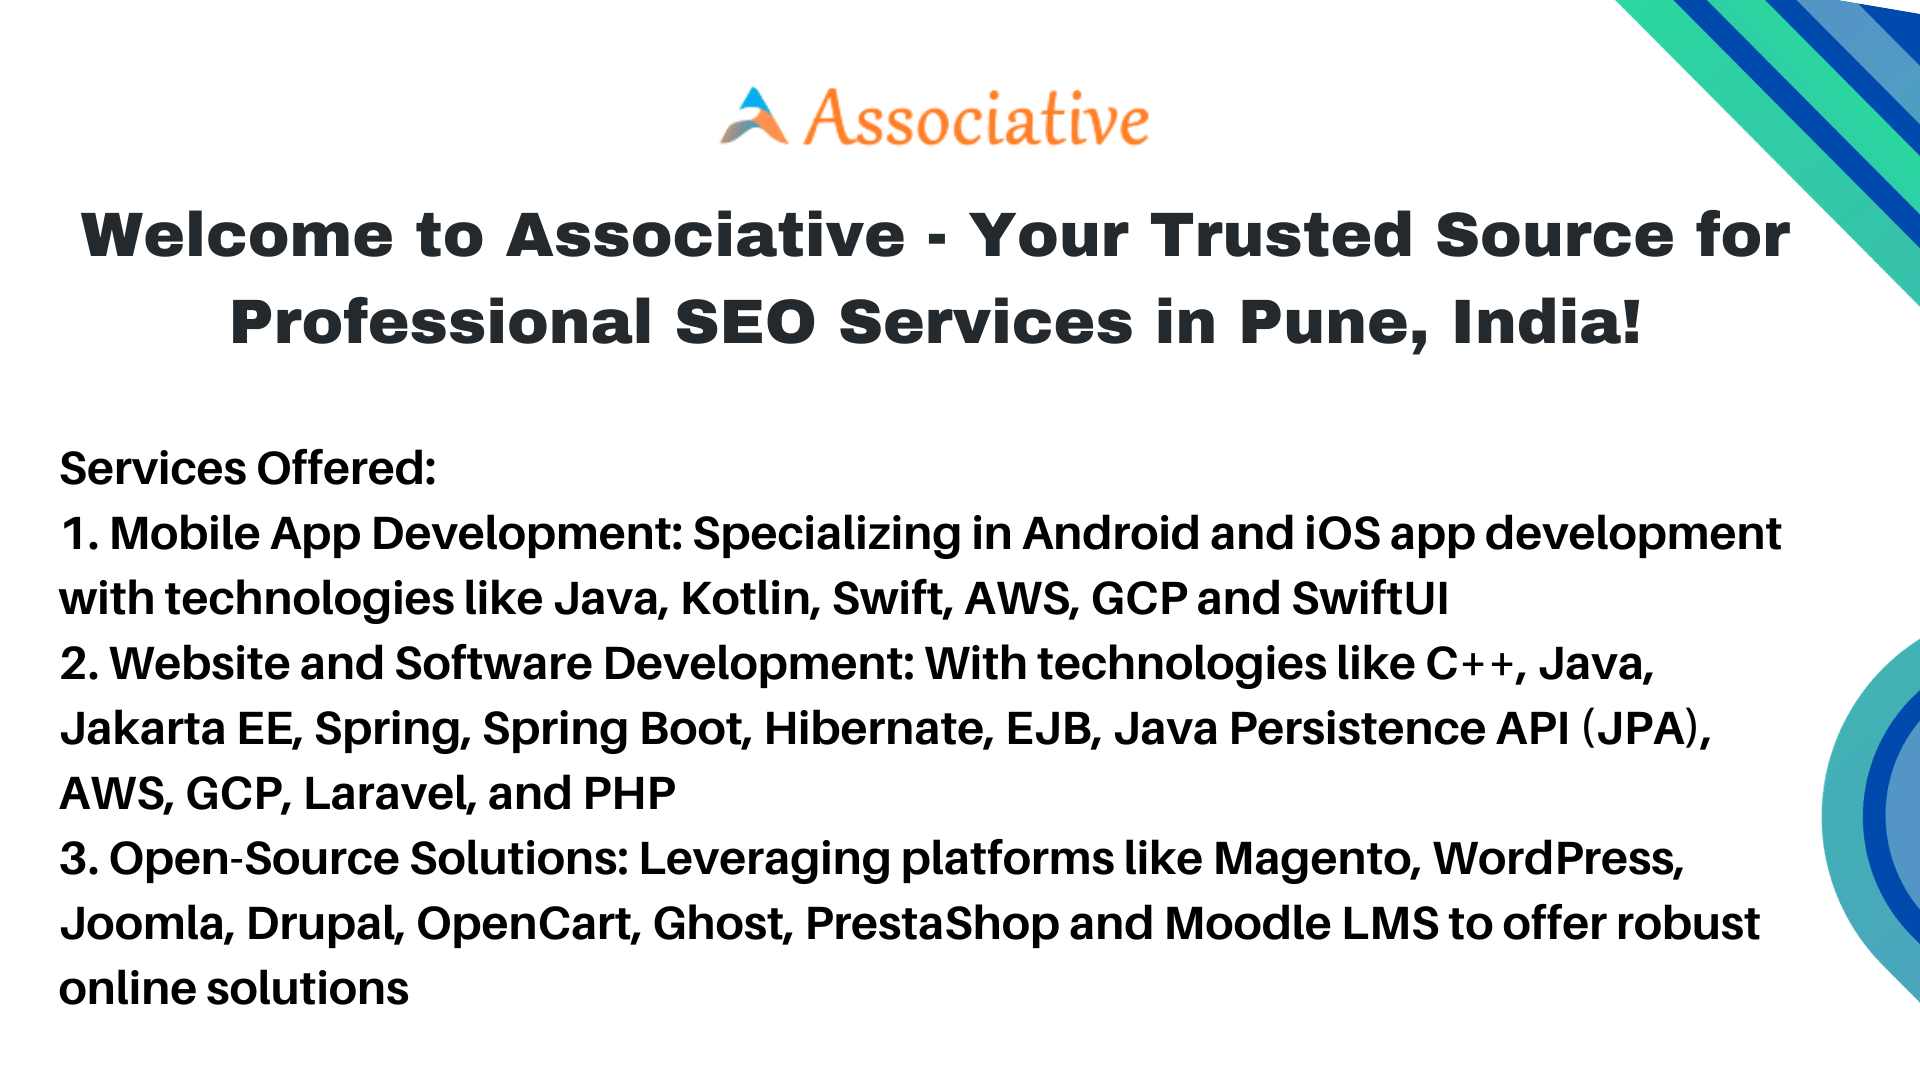 Welcome to Associative Your Trusted Source for Professional SEO Services in Pune India